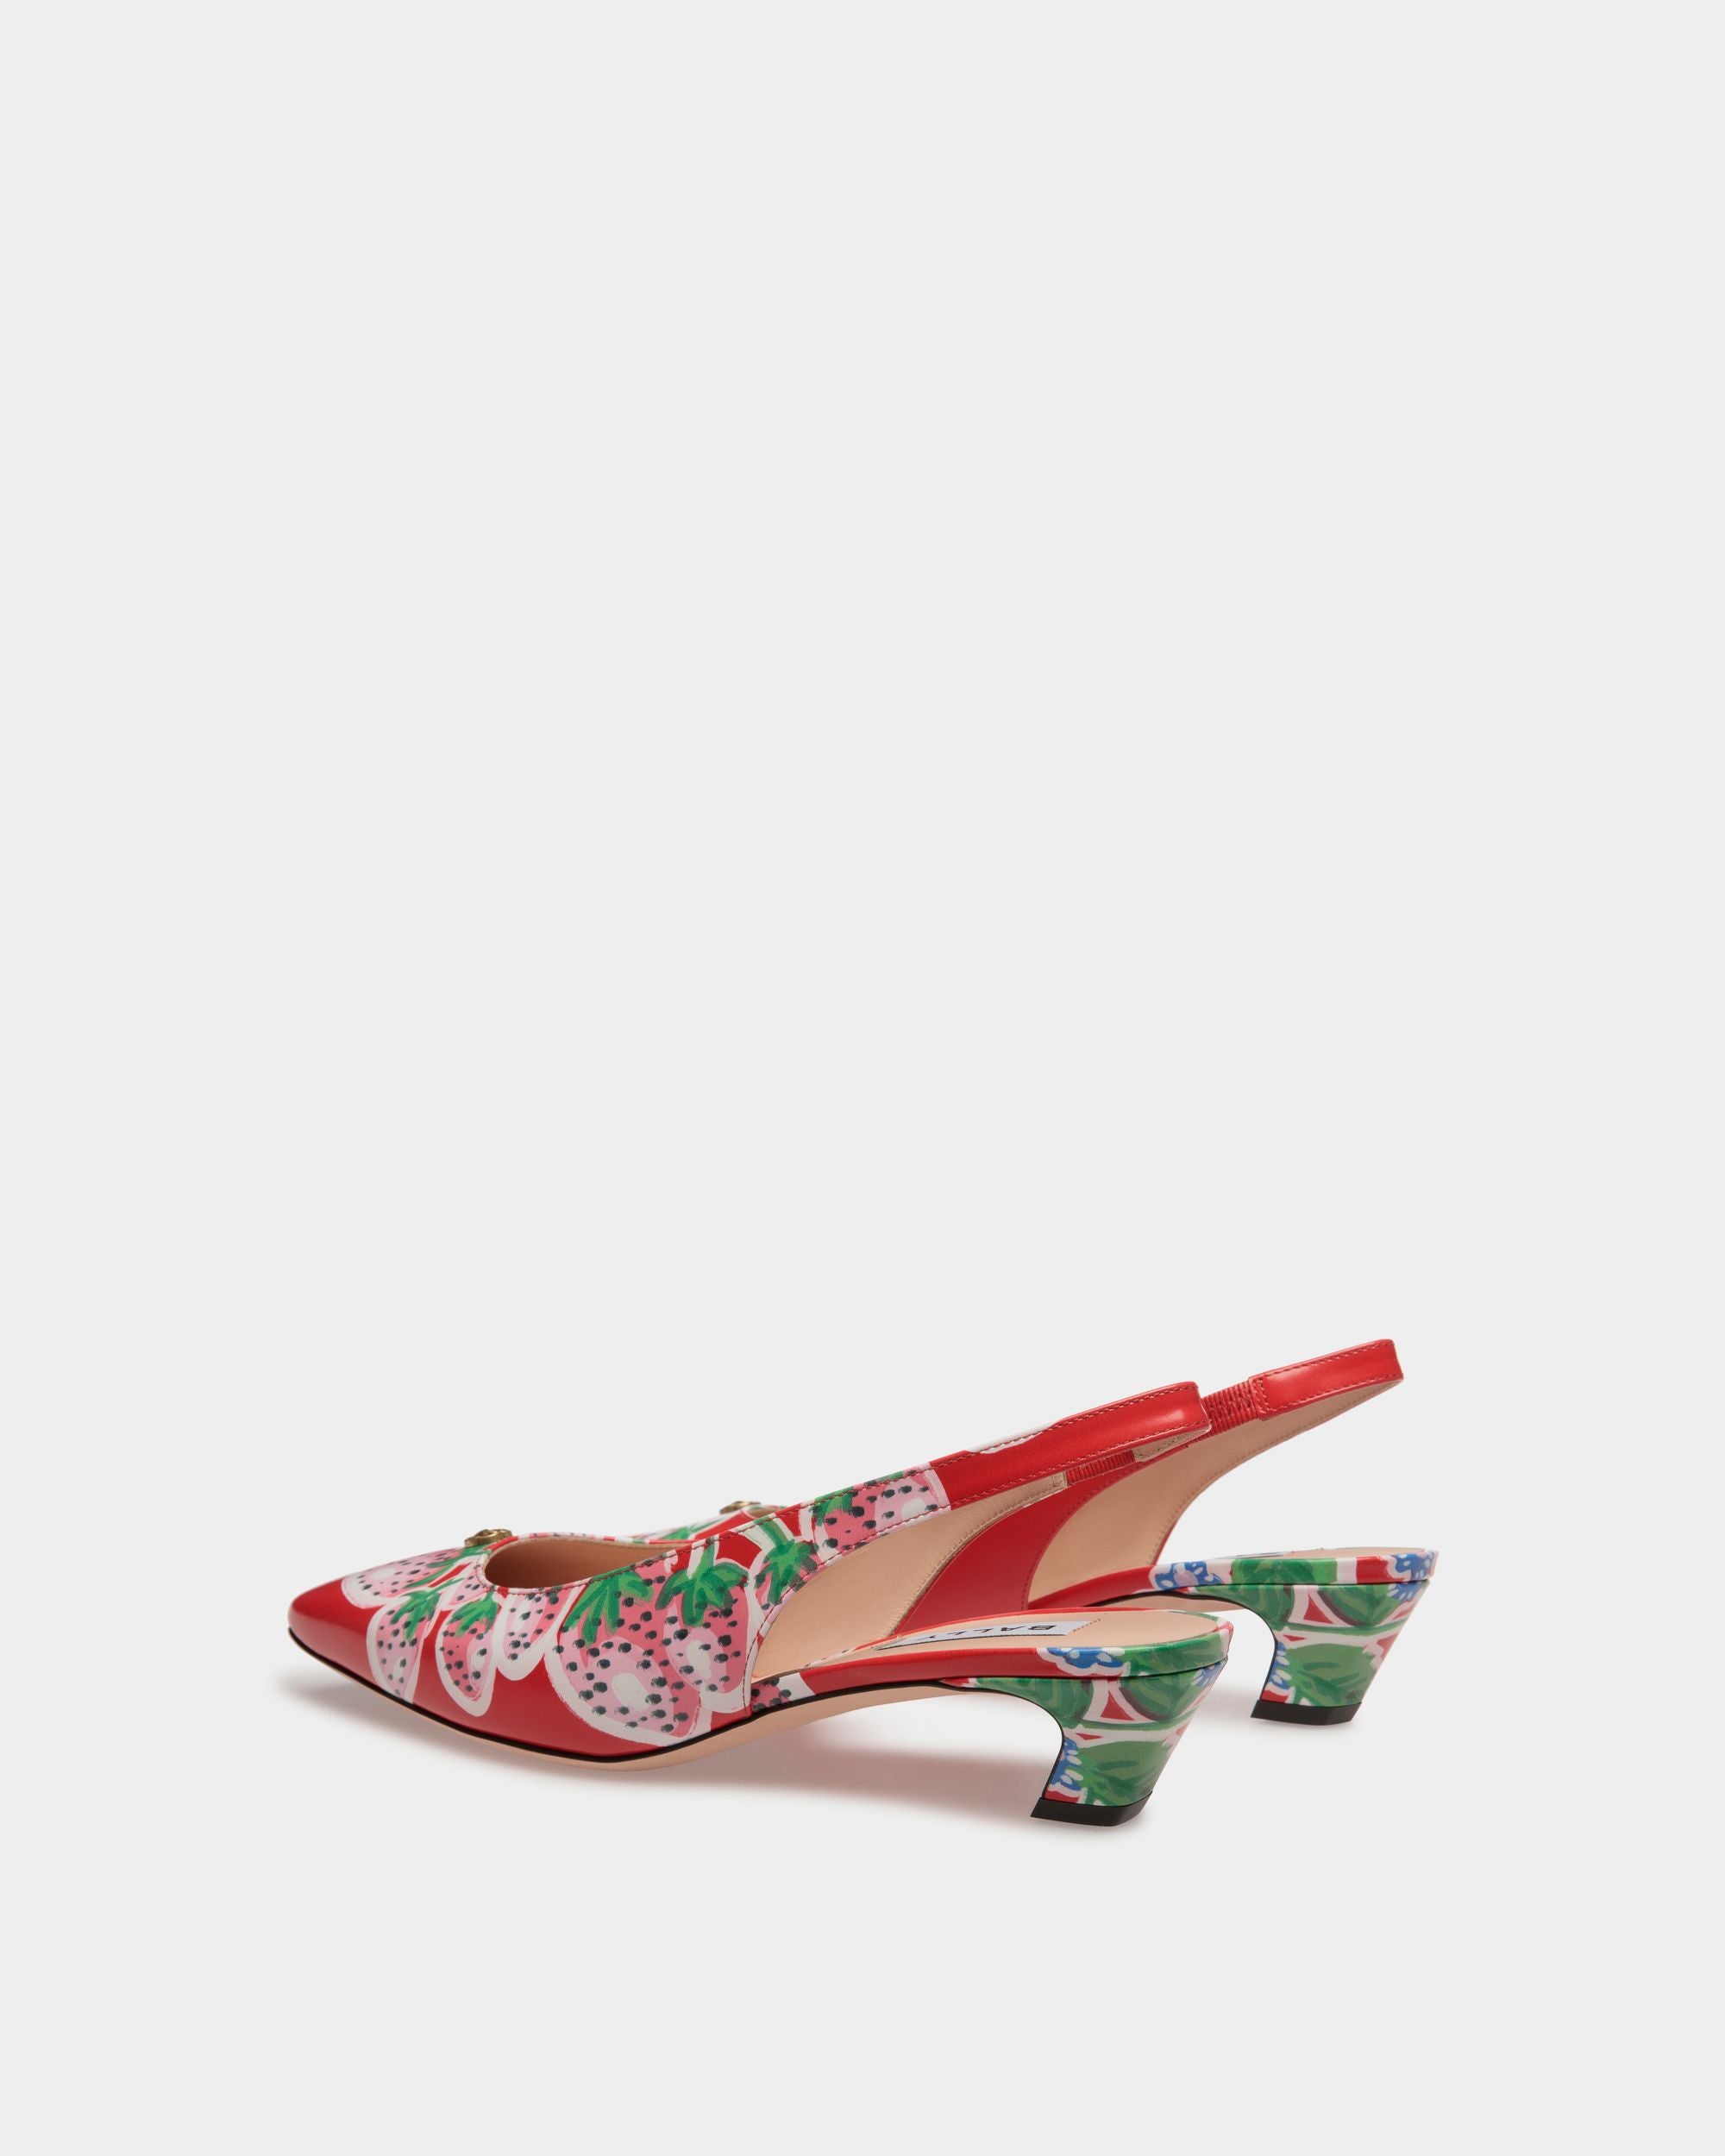 Sylt | Women's Slingback Pump in Strawberry Print Brushed Leather | Bally | Still Life 3/4 Back